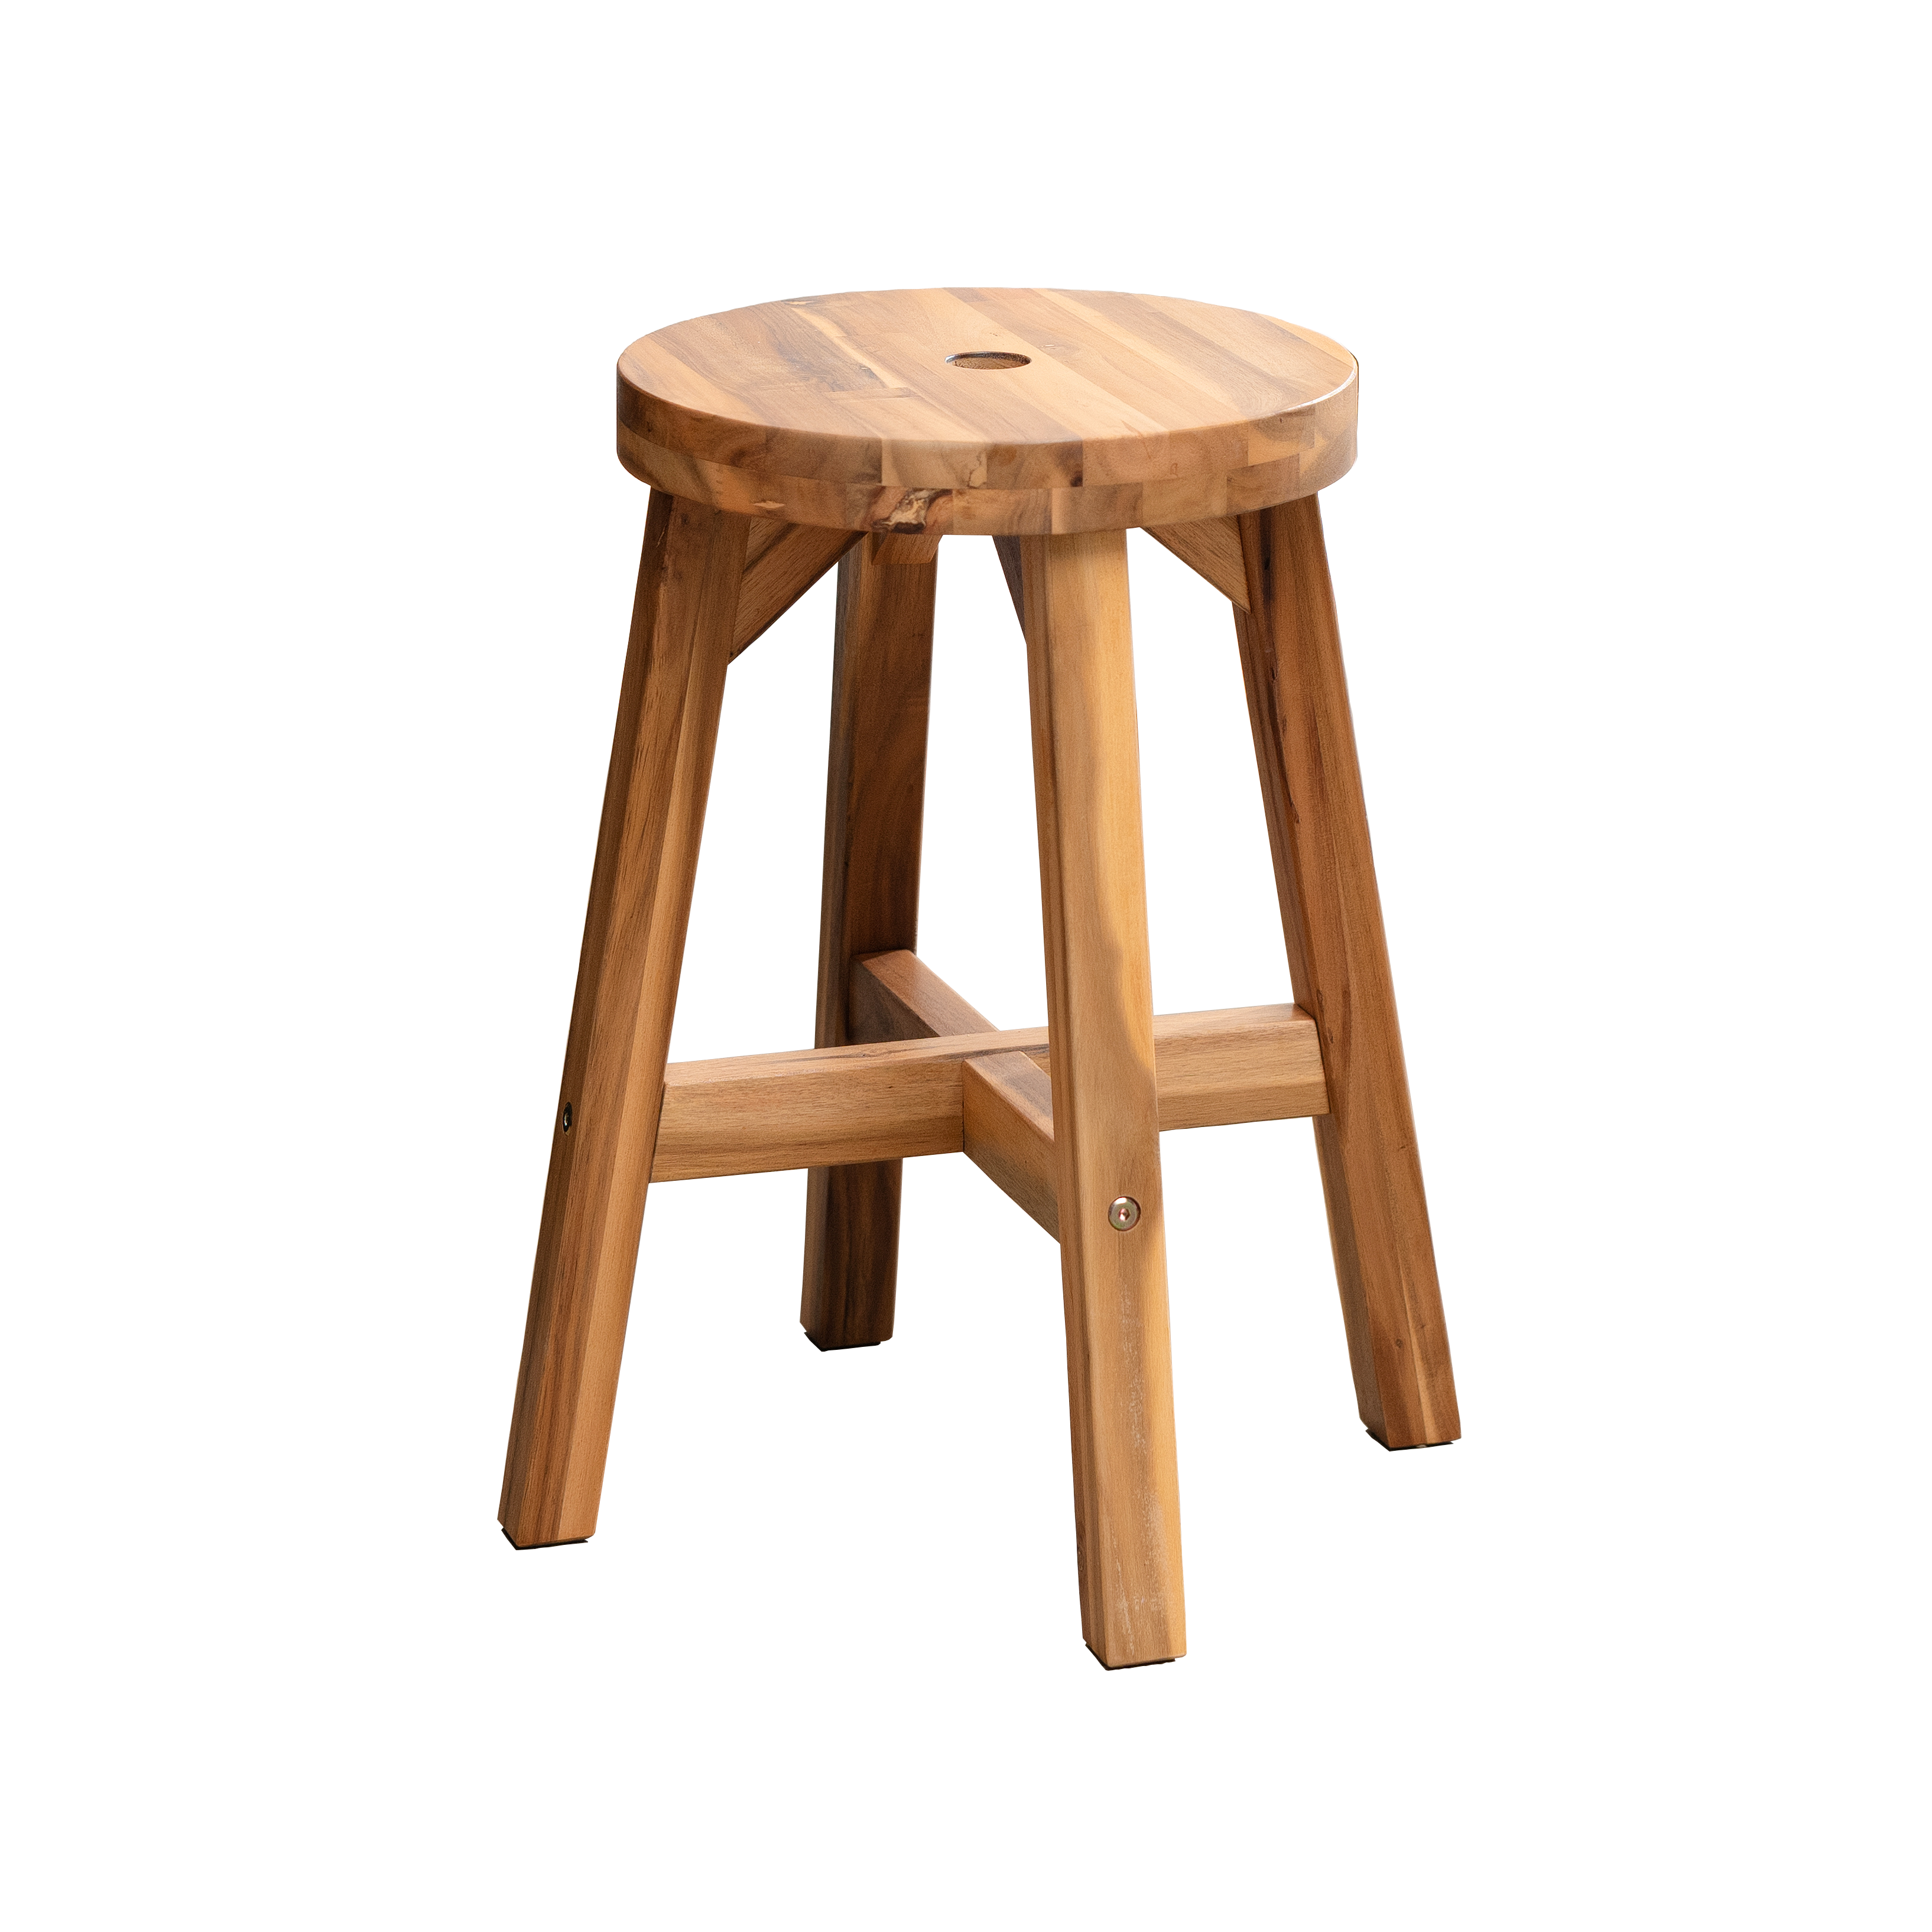 BEEFURNI Acacia Wood Stool Round Top Chairs Best Ideas End Tables For Sofas Sub-stool for Living Room Bedside Strong Weight Capacity Upto 350 LBS, Natural Color-Boyel Living